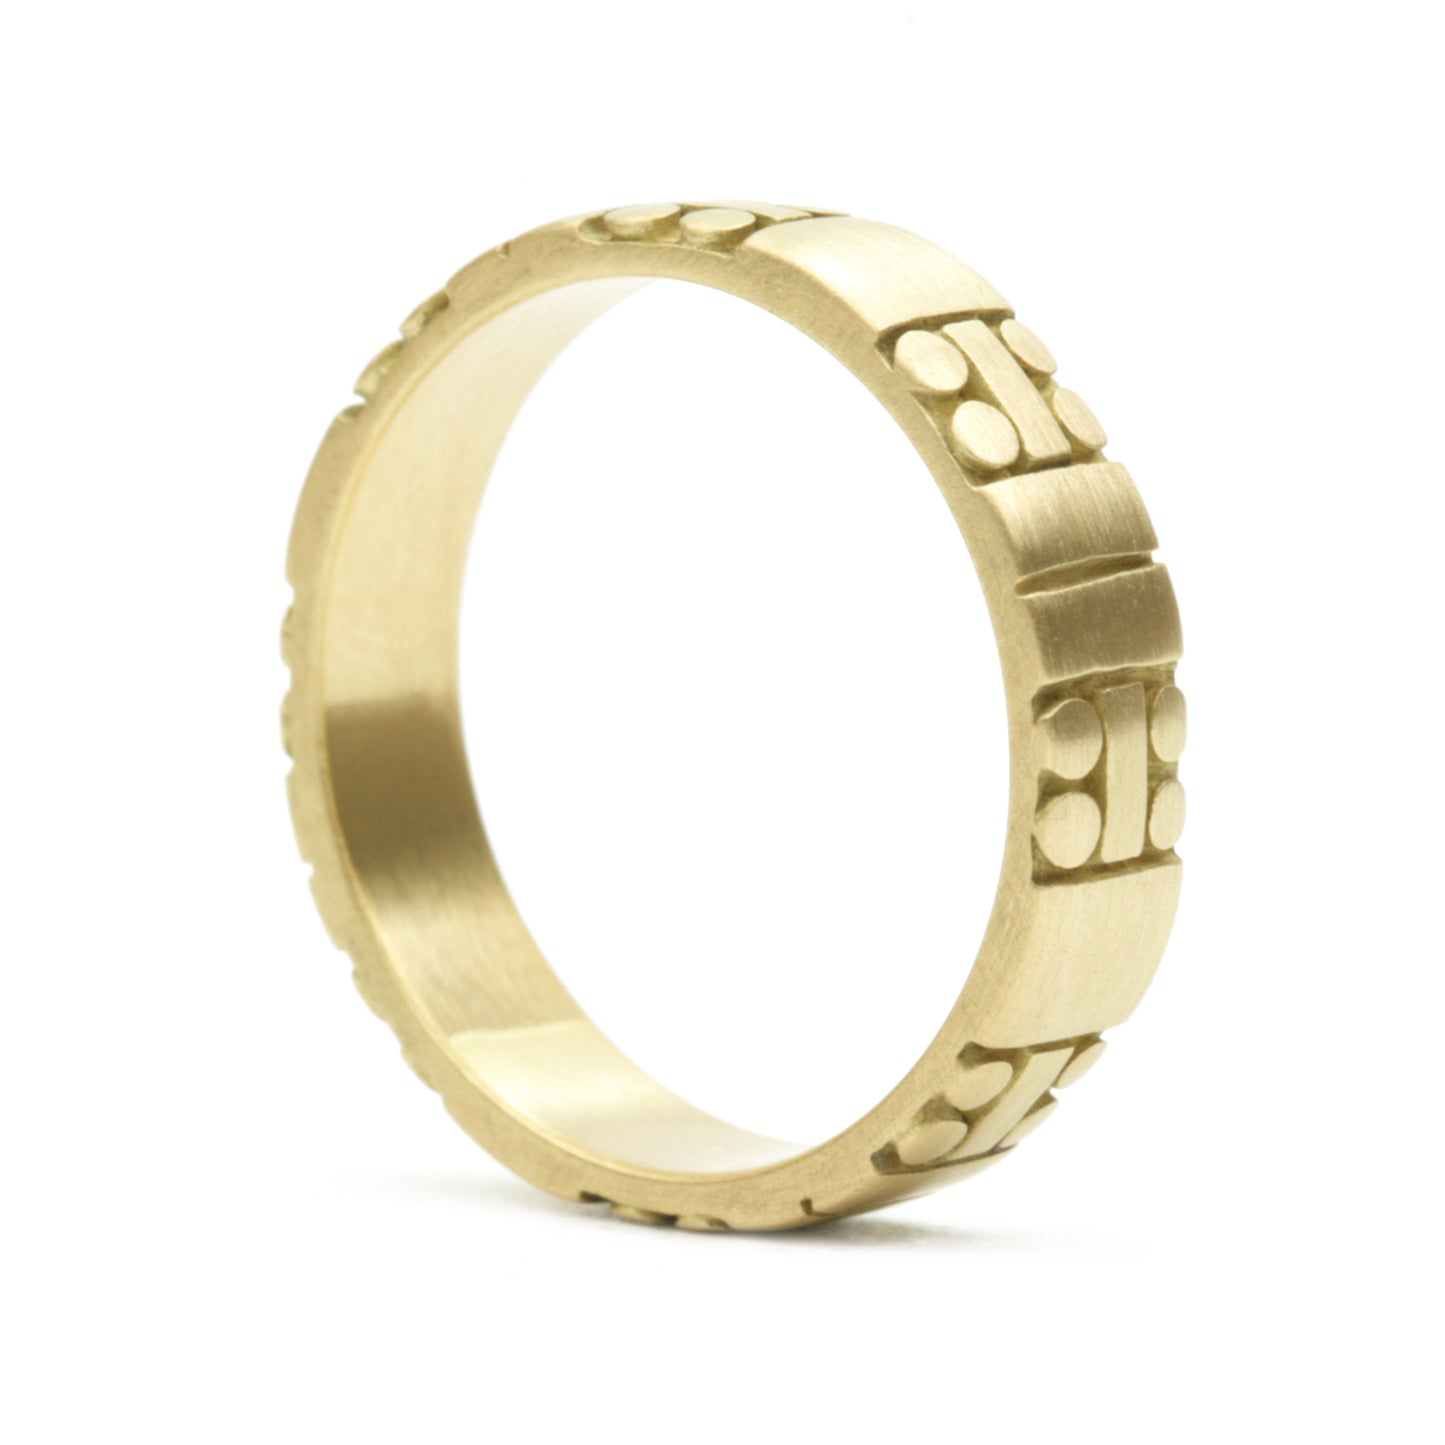 Code Band 4.5 mm in 18K yellow gold, side view